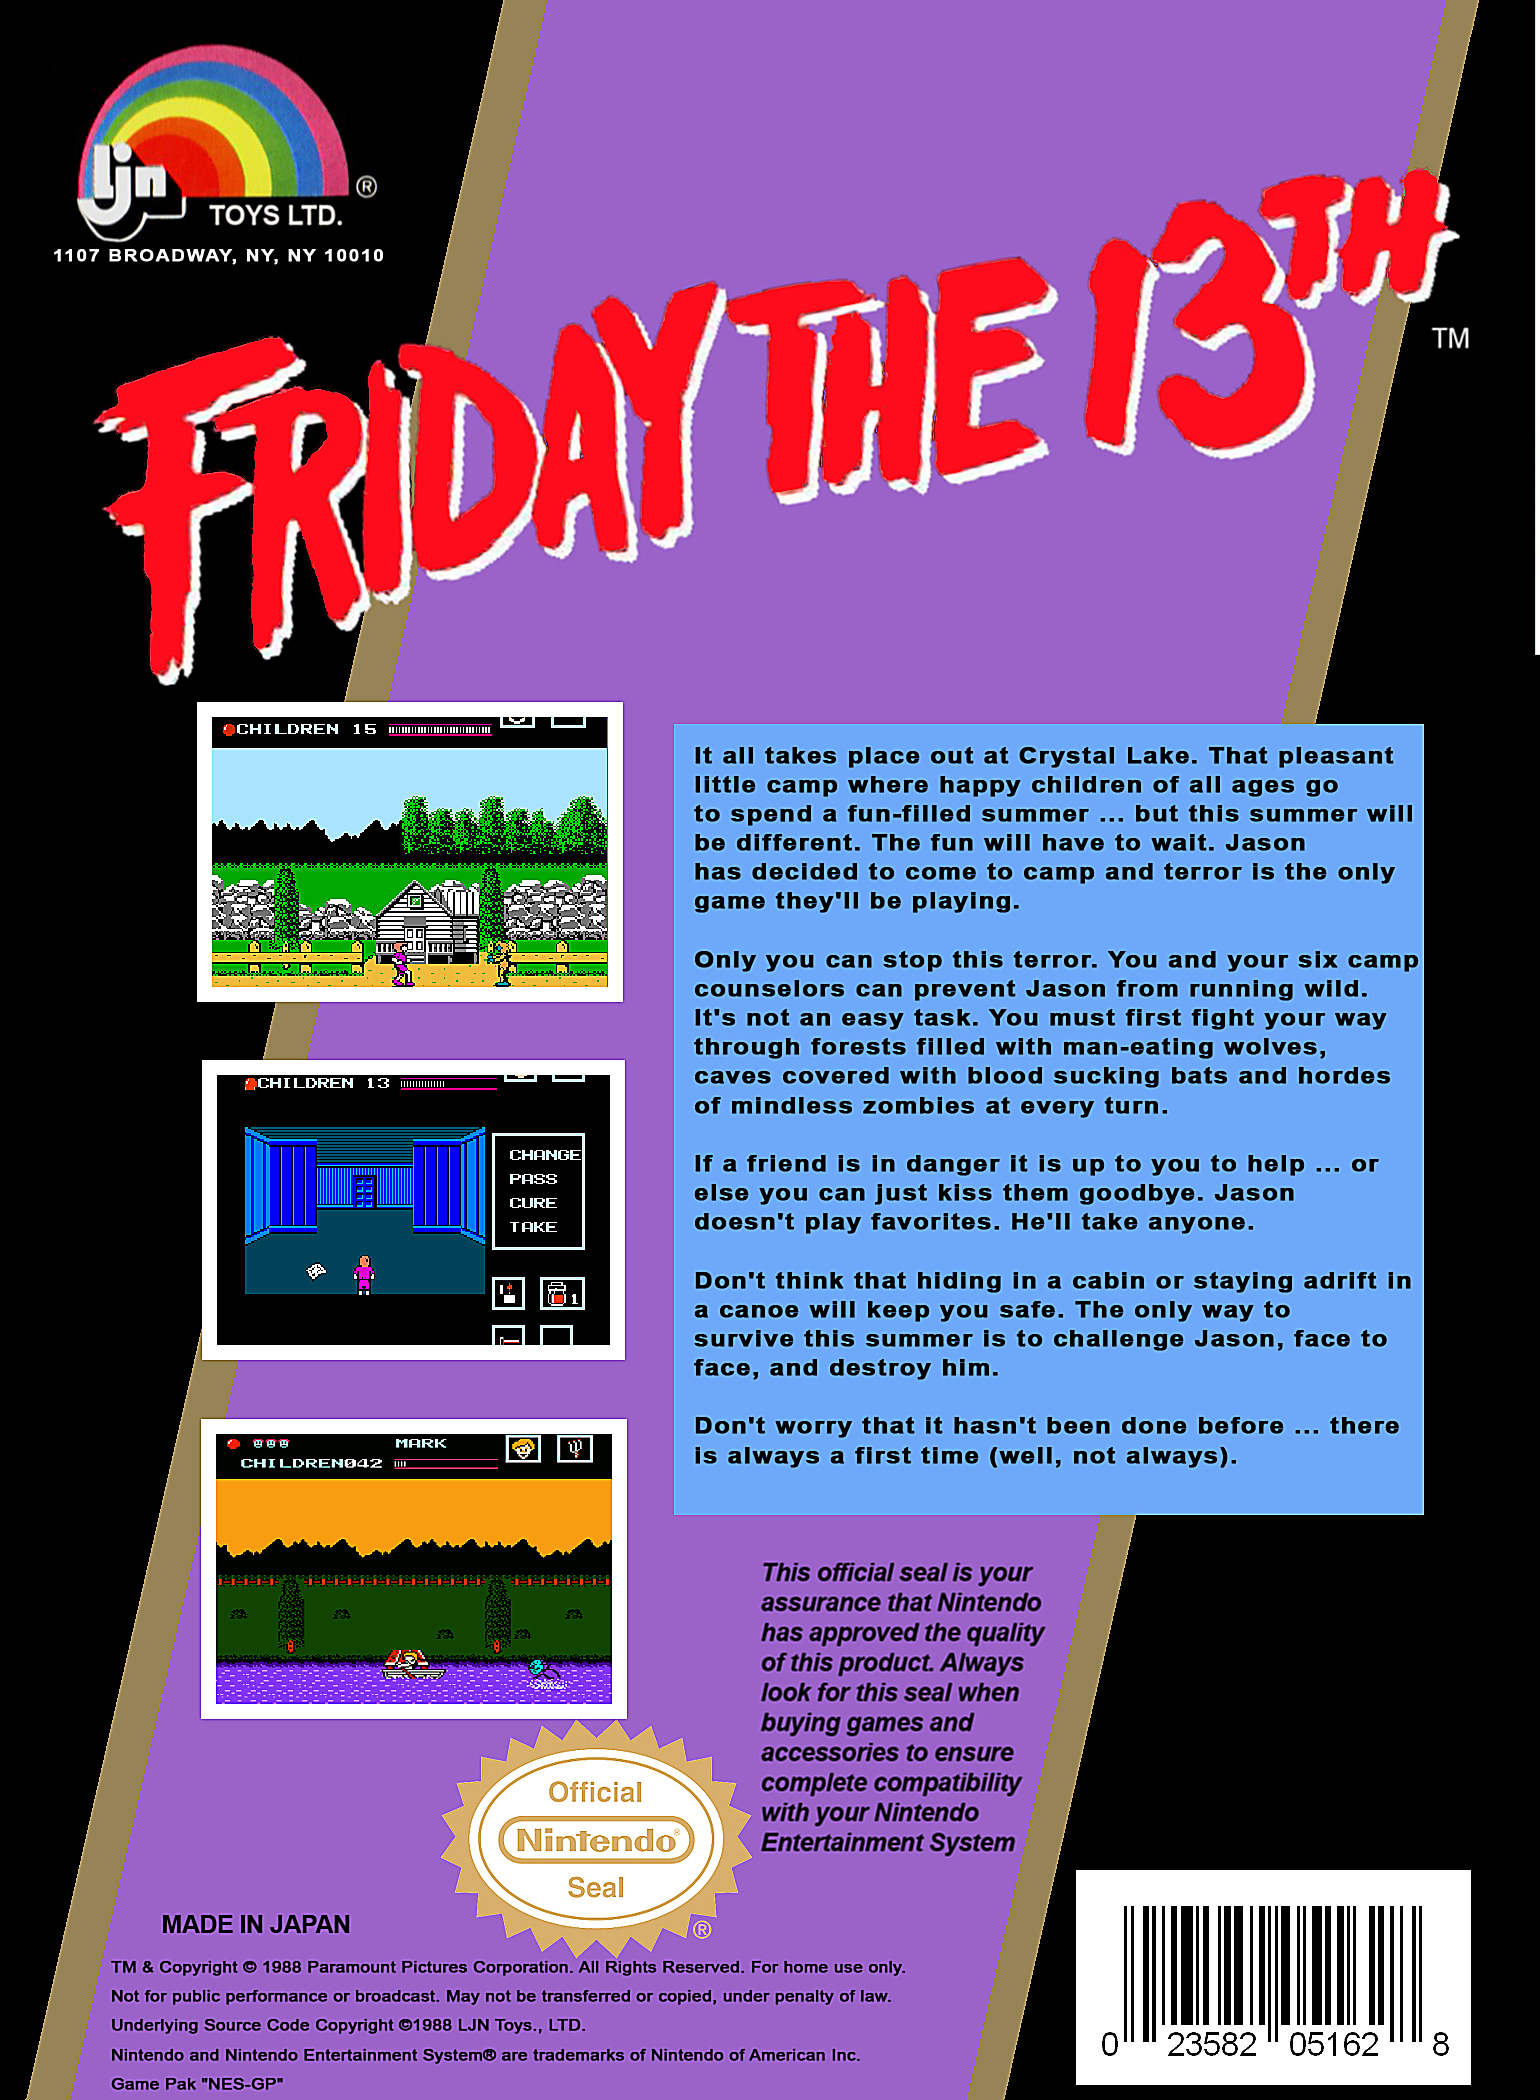 A Look Back At The 'Friday The 13th' Video Game For The Nintendo  Entertainment System (NES), Frid…